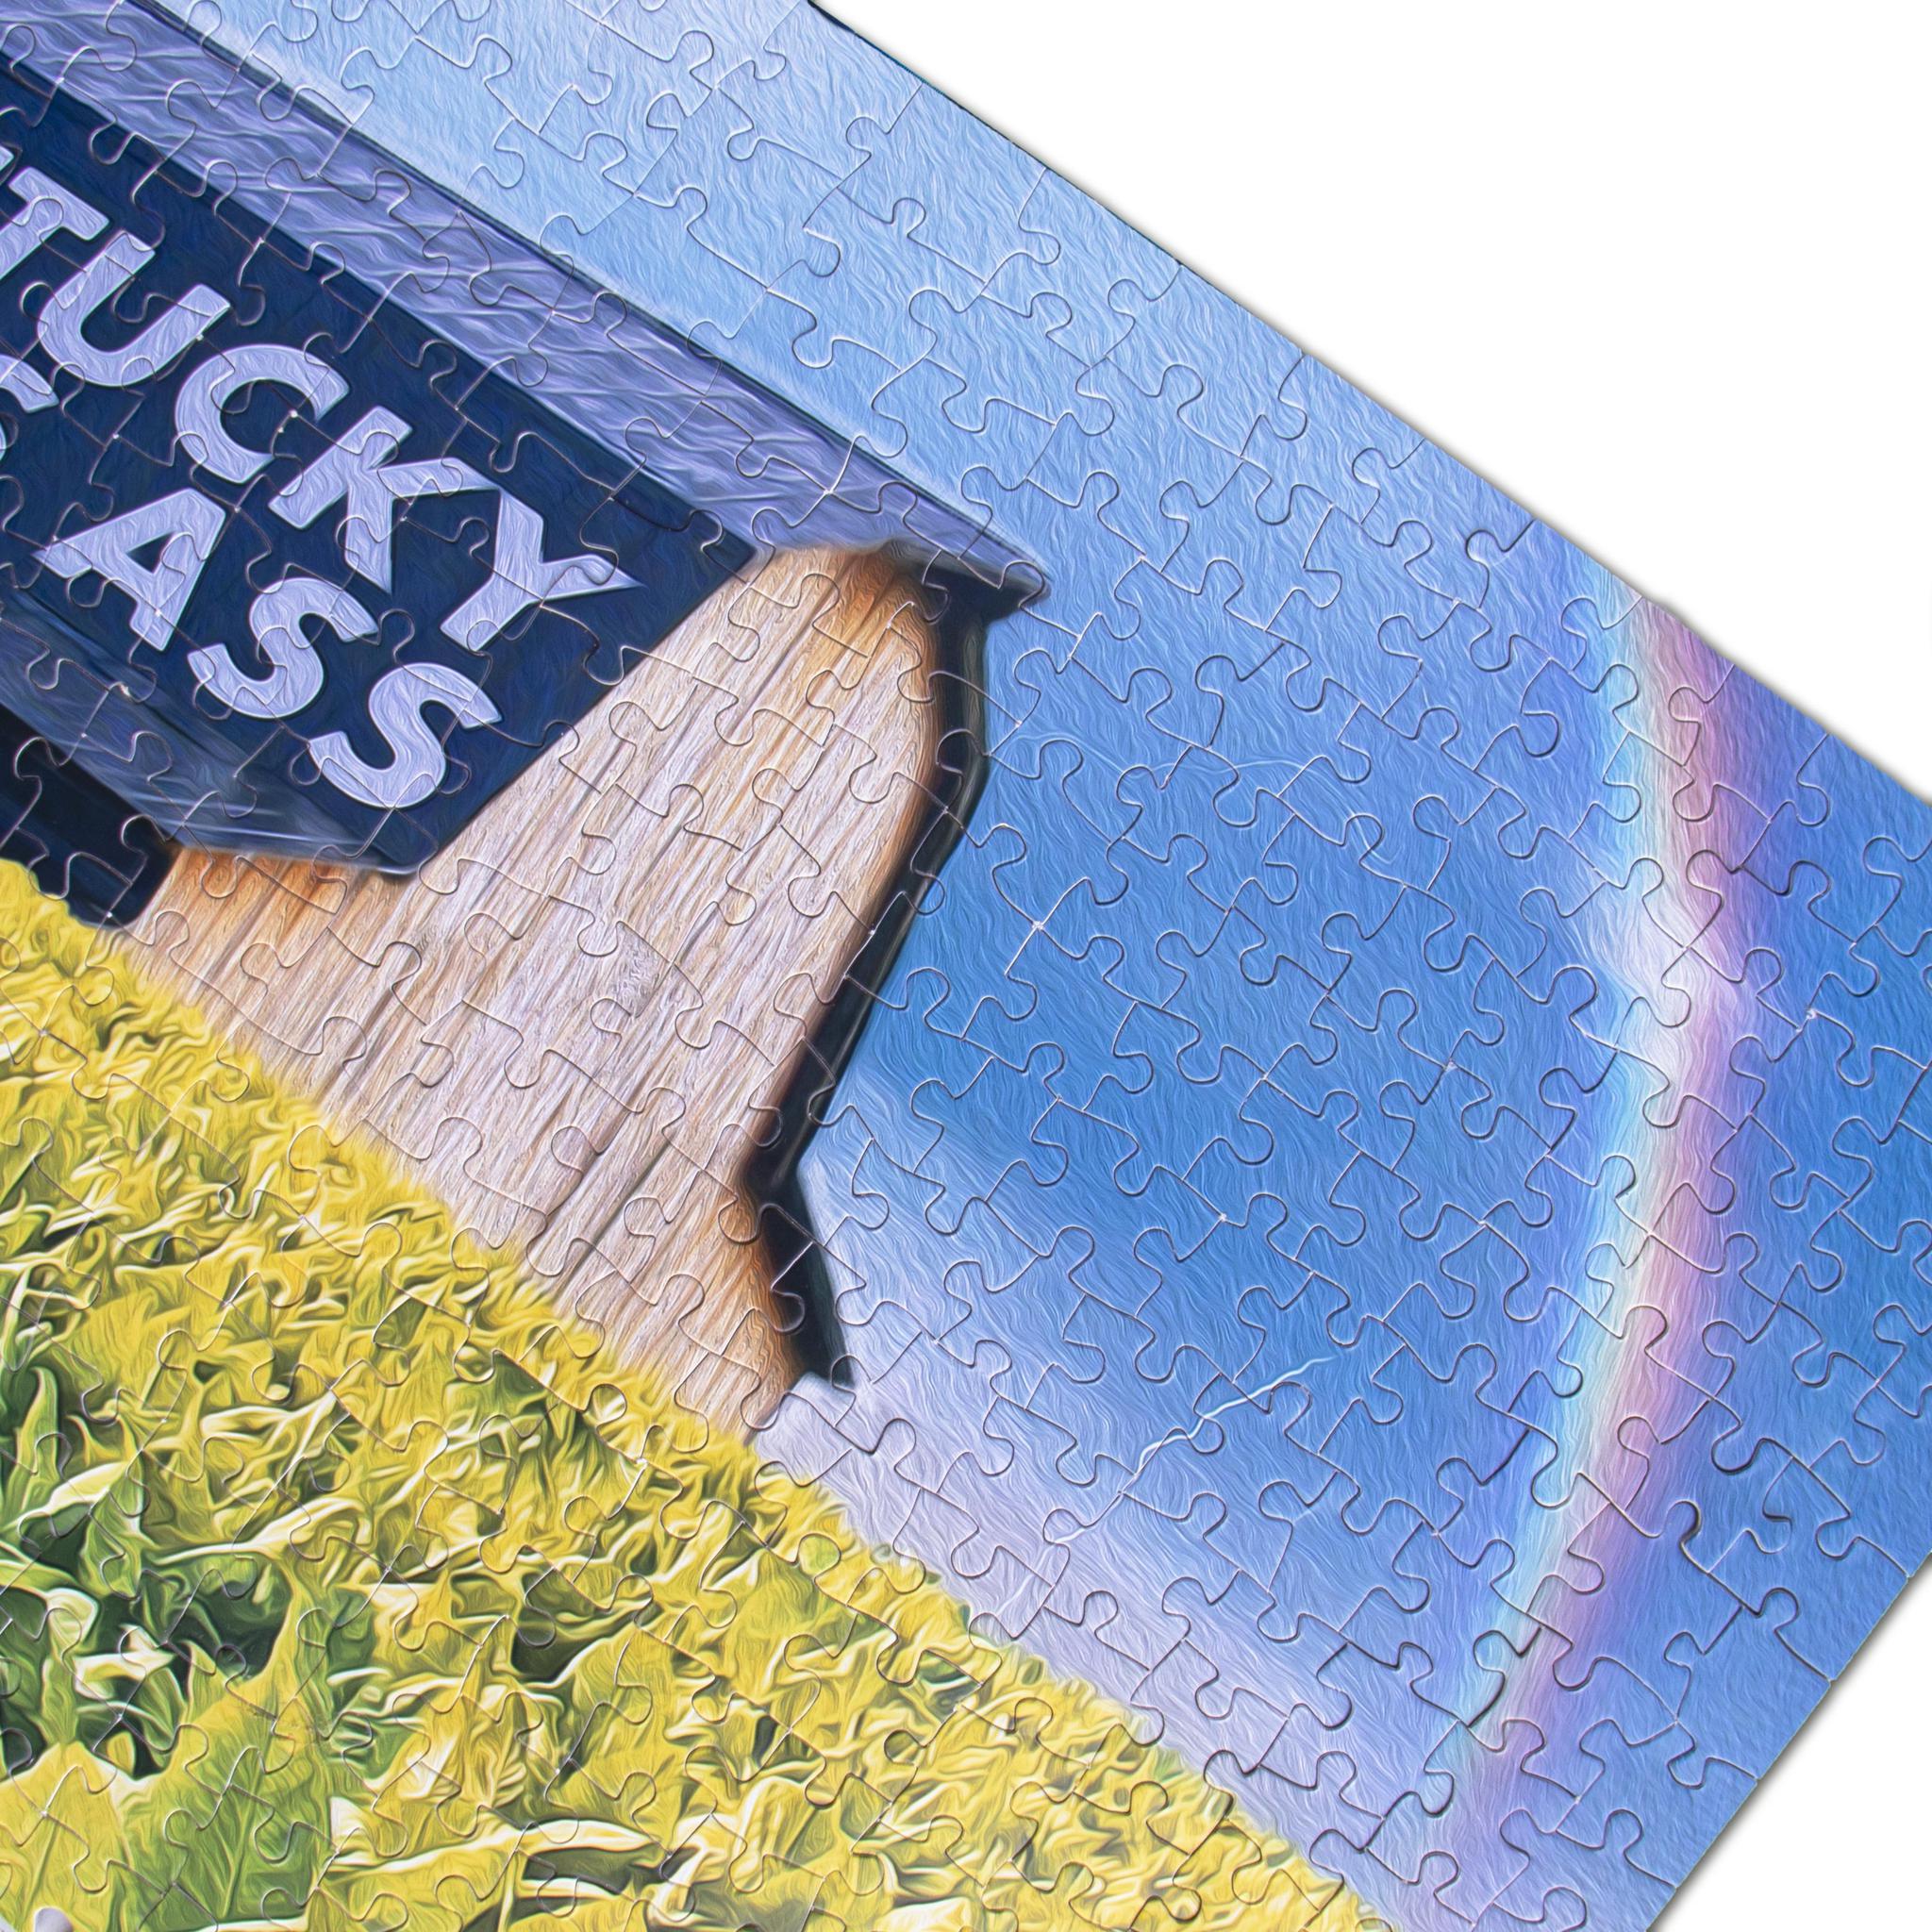 KY Kicks Ass Tobacco Barn Puzzle-Odds and Ends-KY for KY Store